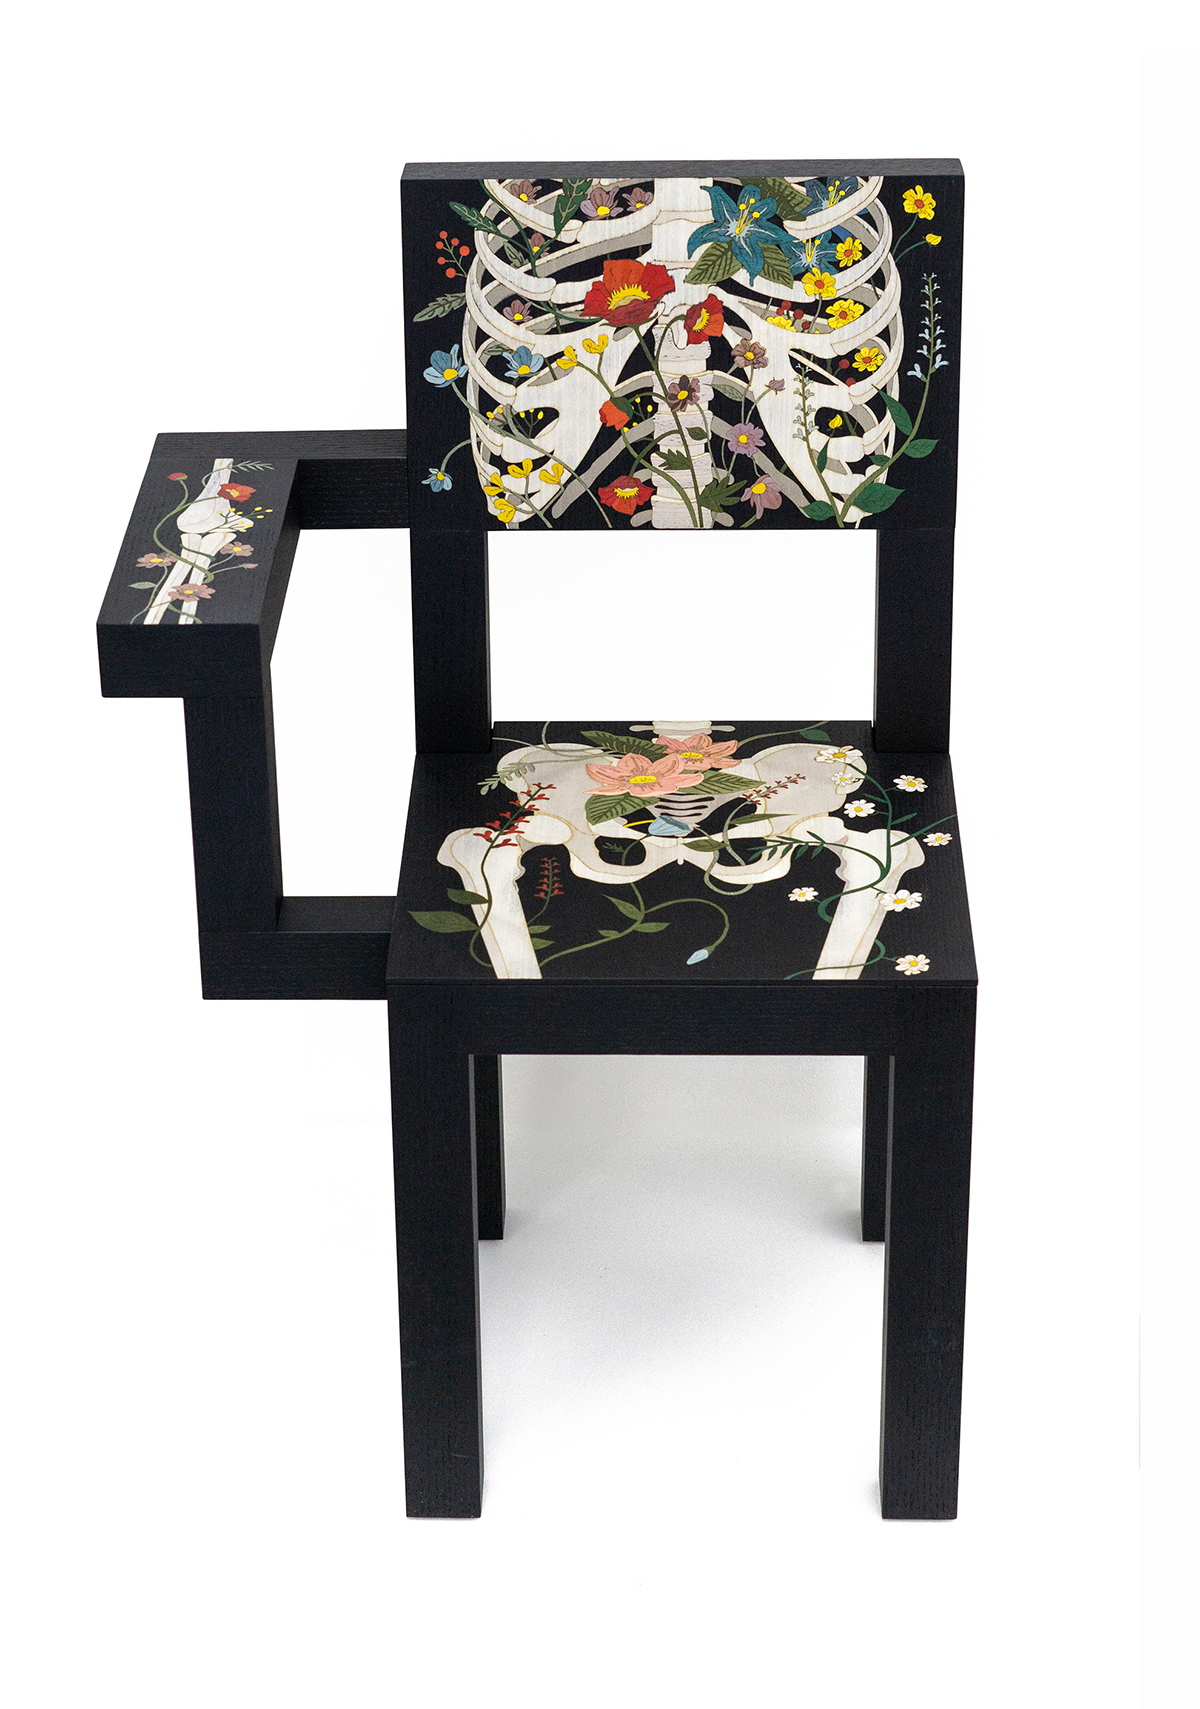 LIFE AFTER LIFE CHAIR - Marcantonio design